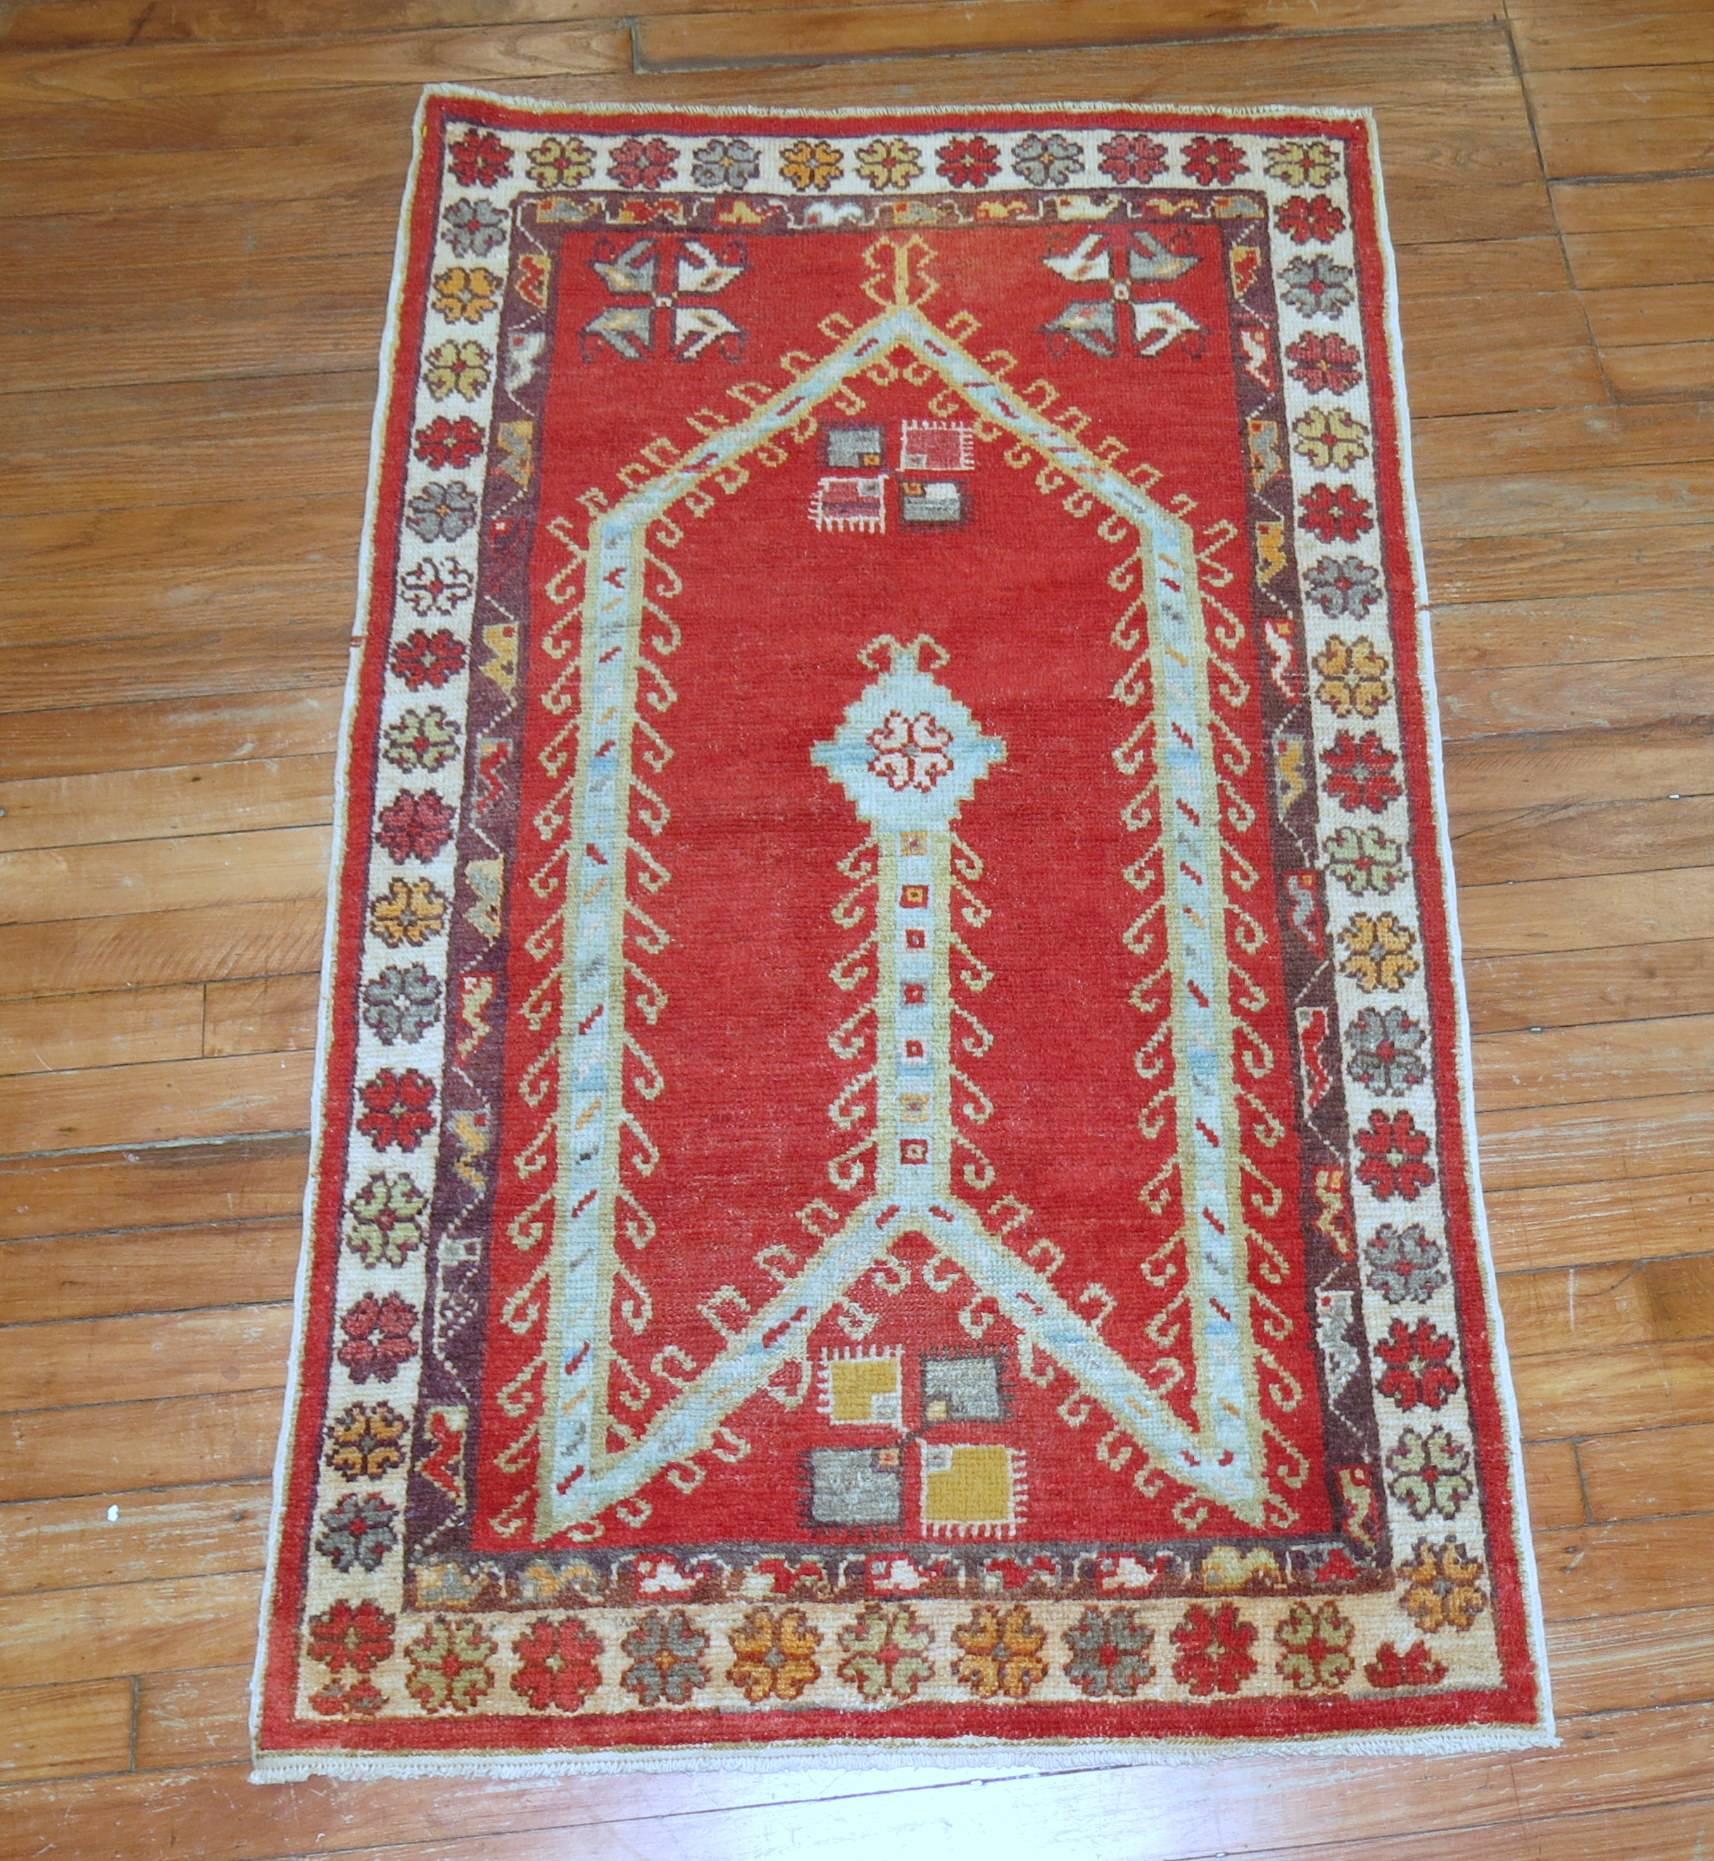 An early 20th century antique Oushak rug with an icy blue prayer niche motif on a red colored ground.

Measures: 2'8'' x 4'4''.